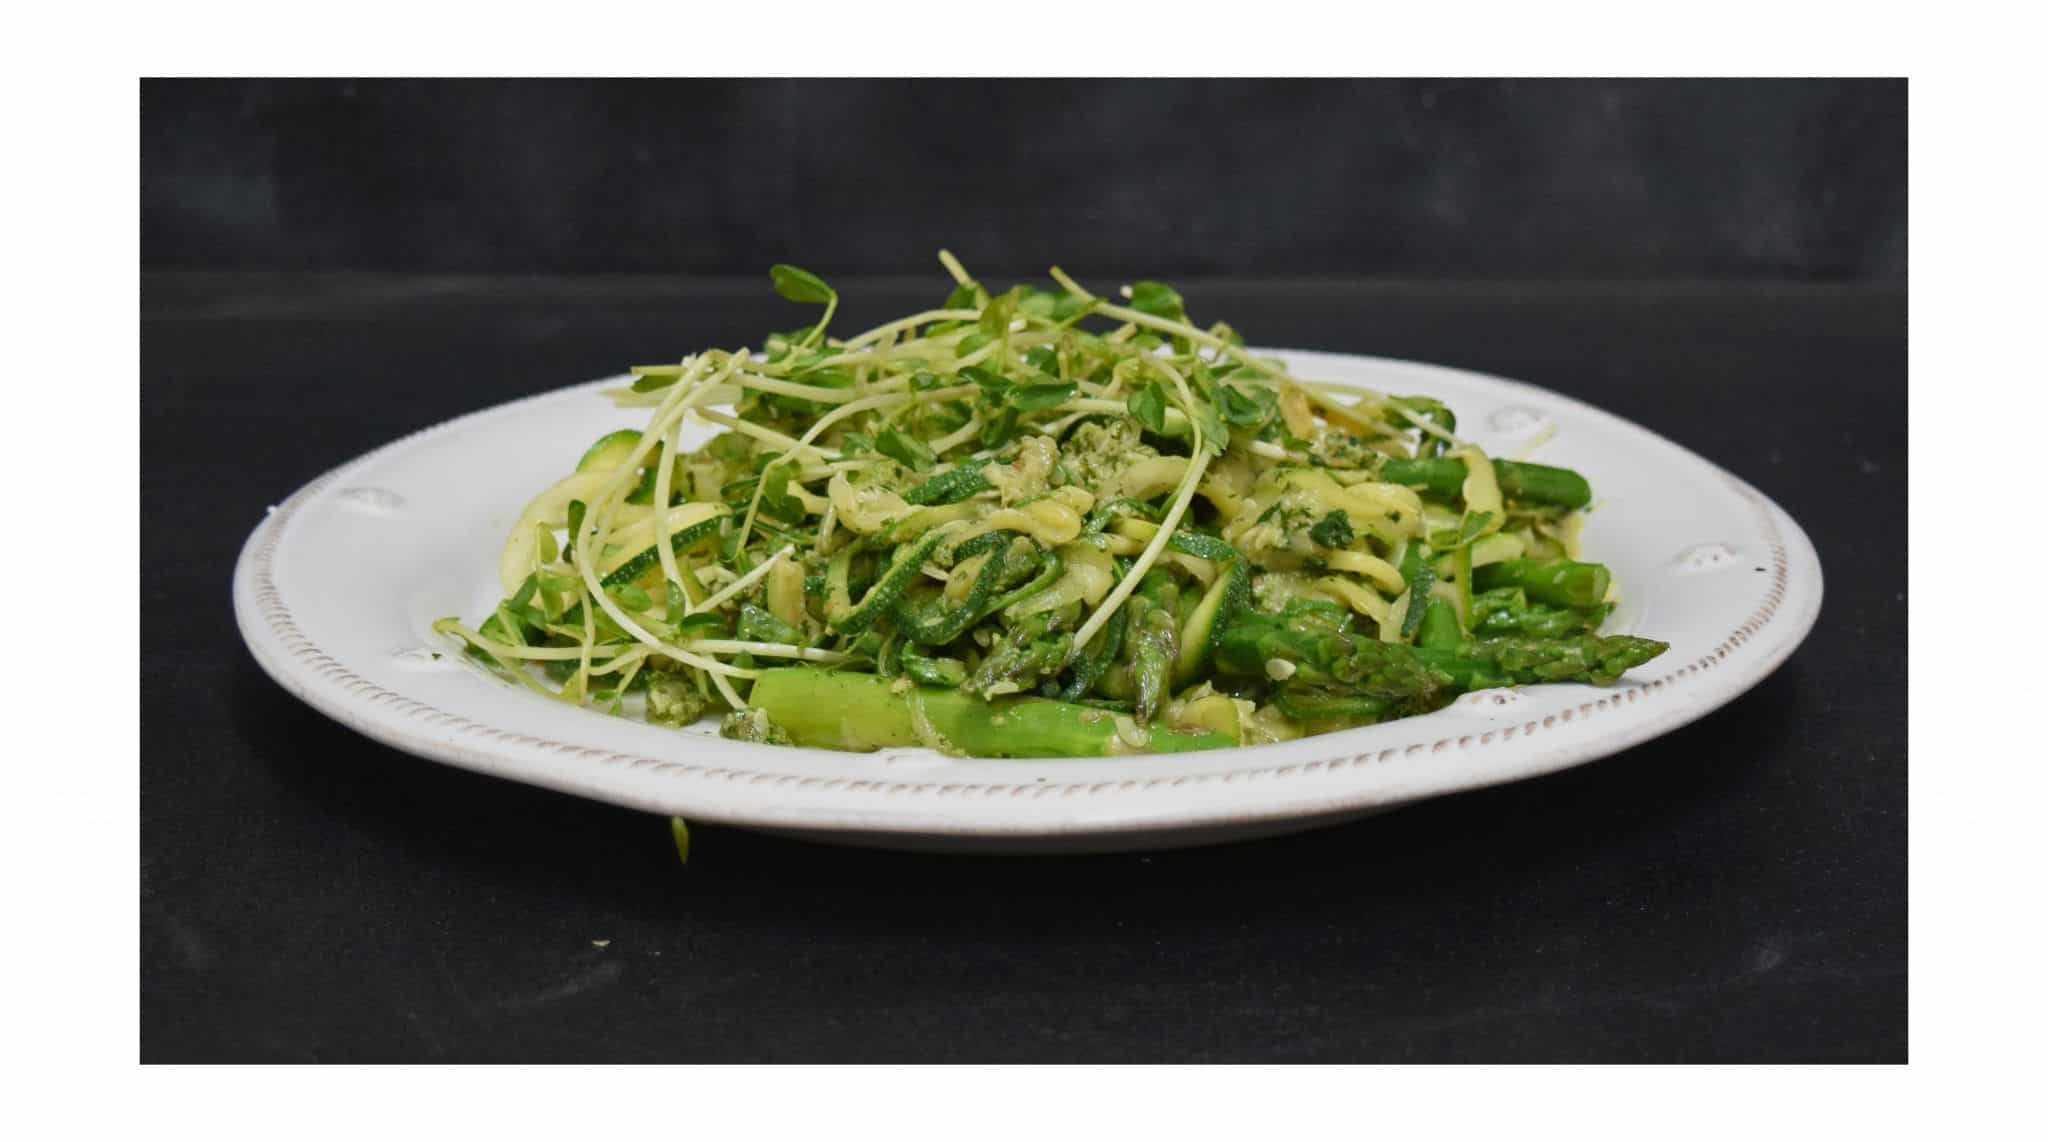 Zucchini Noodles with Asparagus and Mint Pesto